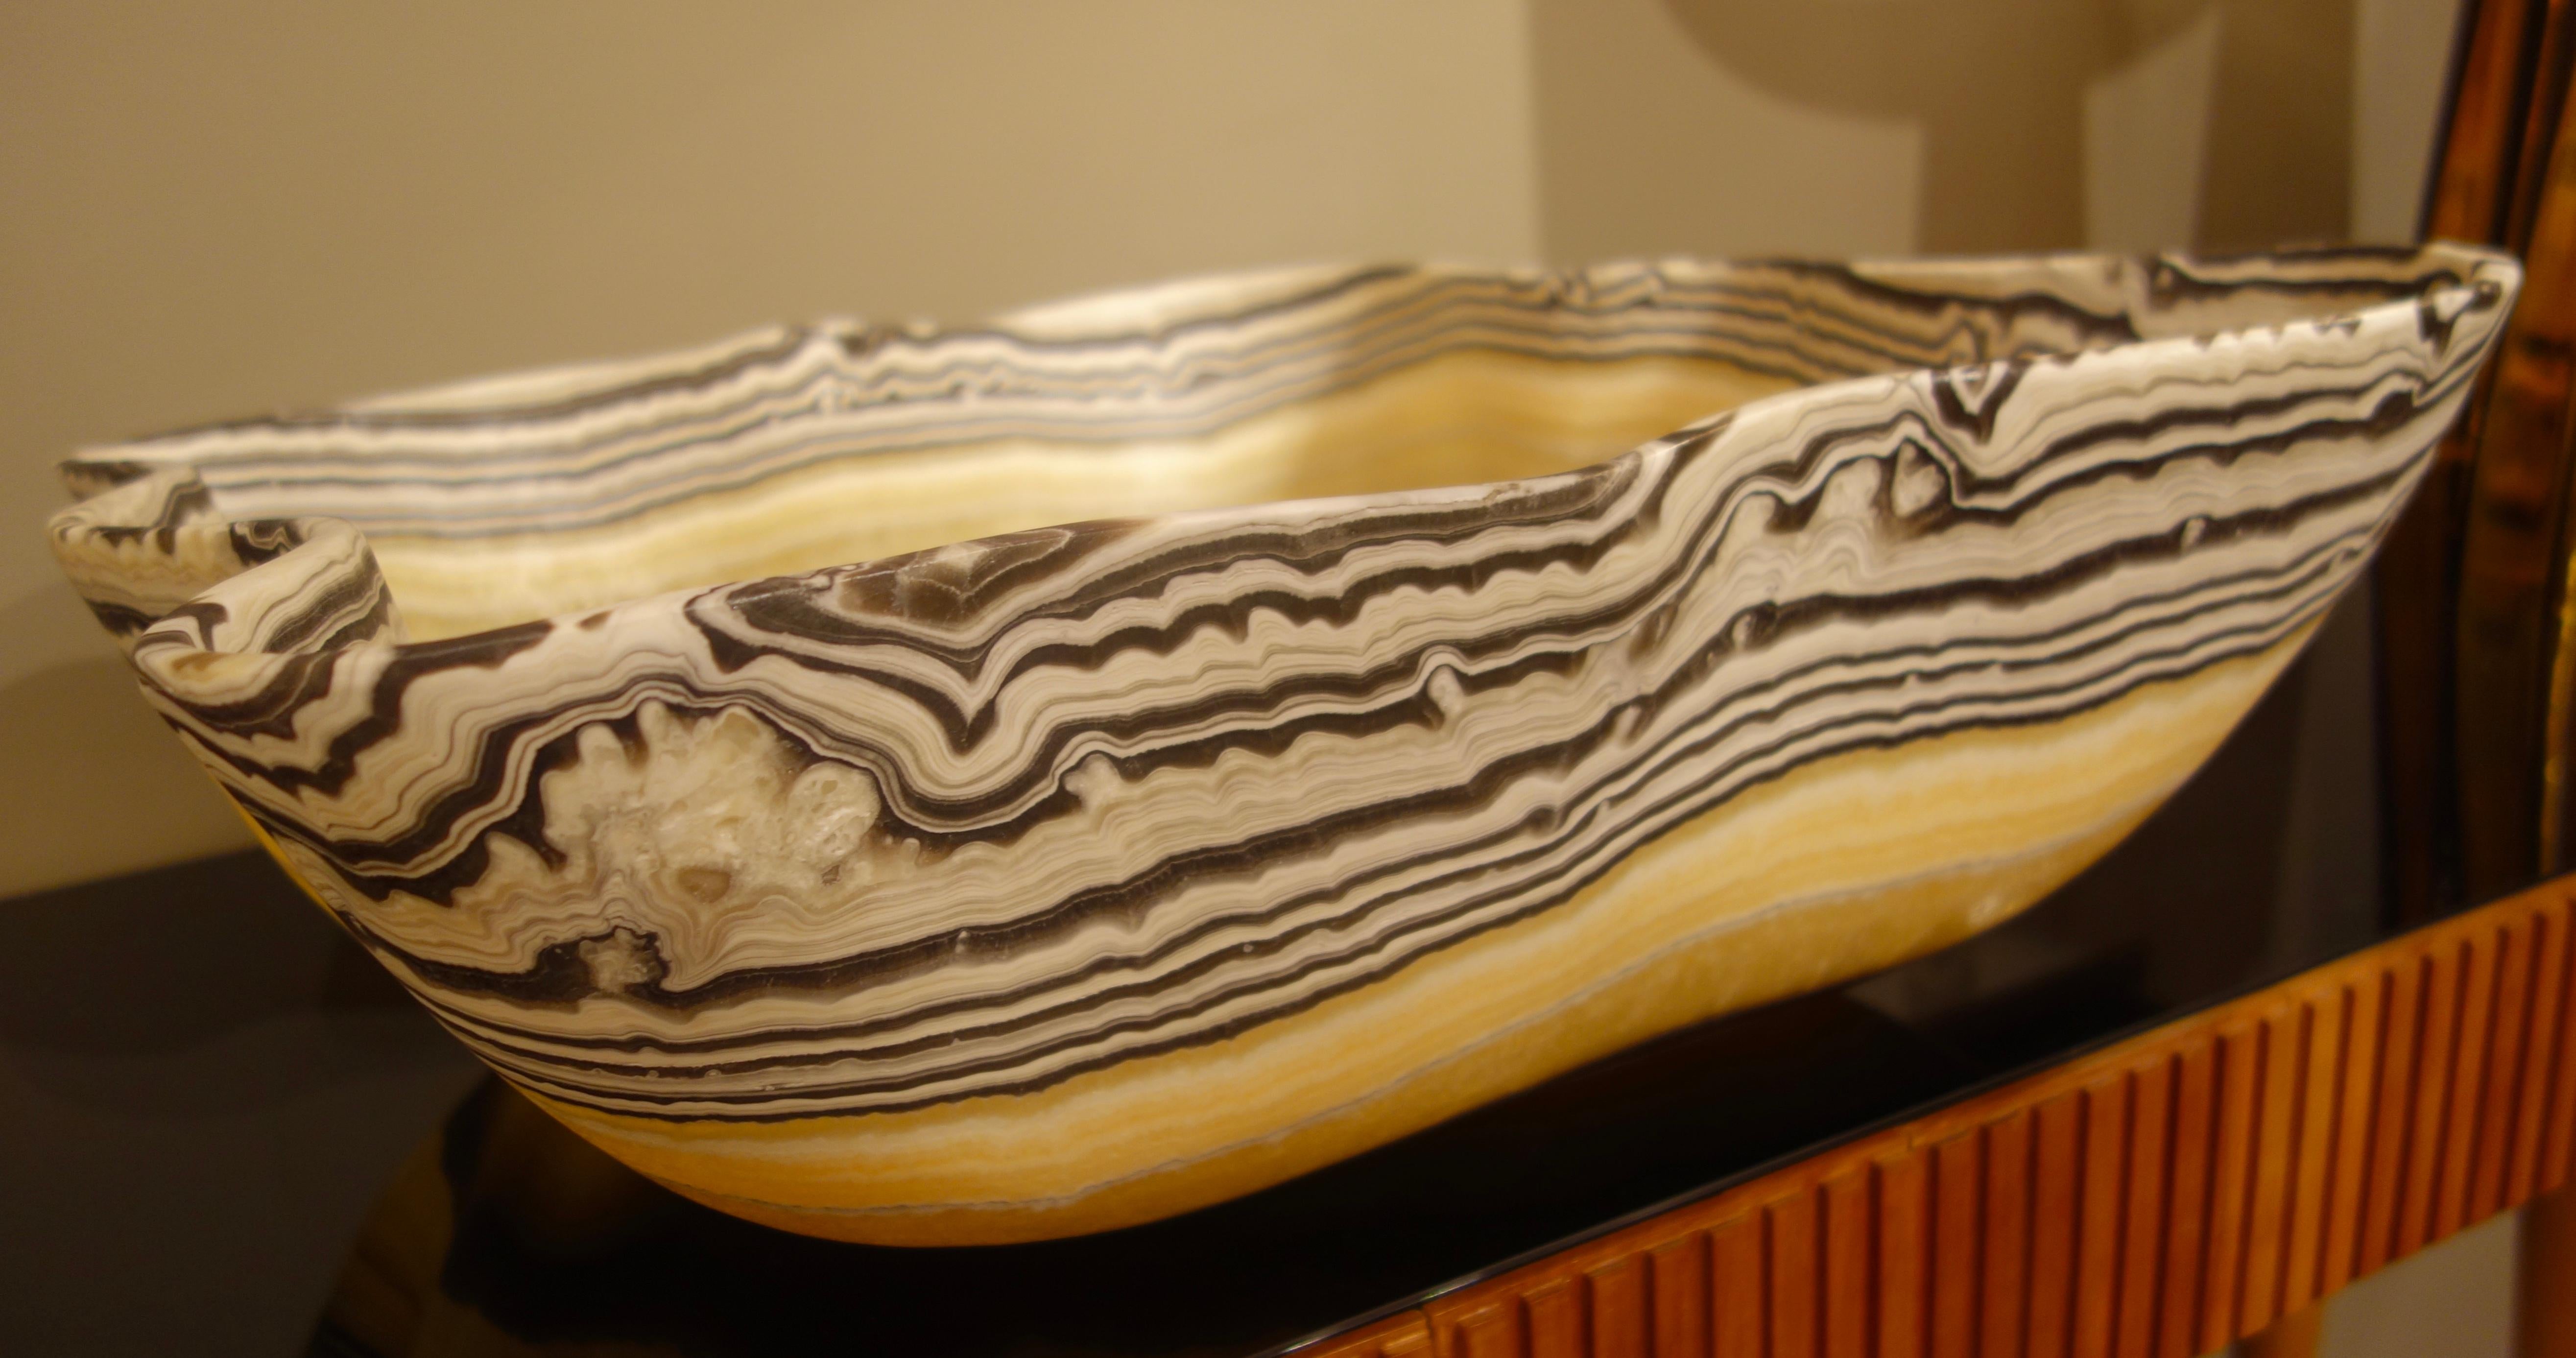 Mexican Large Hand Carved Onyx Bowl or Centerpiece in Gold, Gray and White